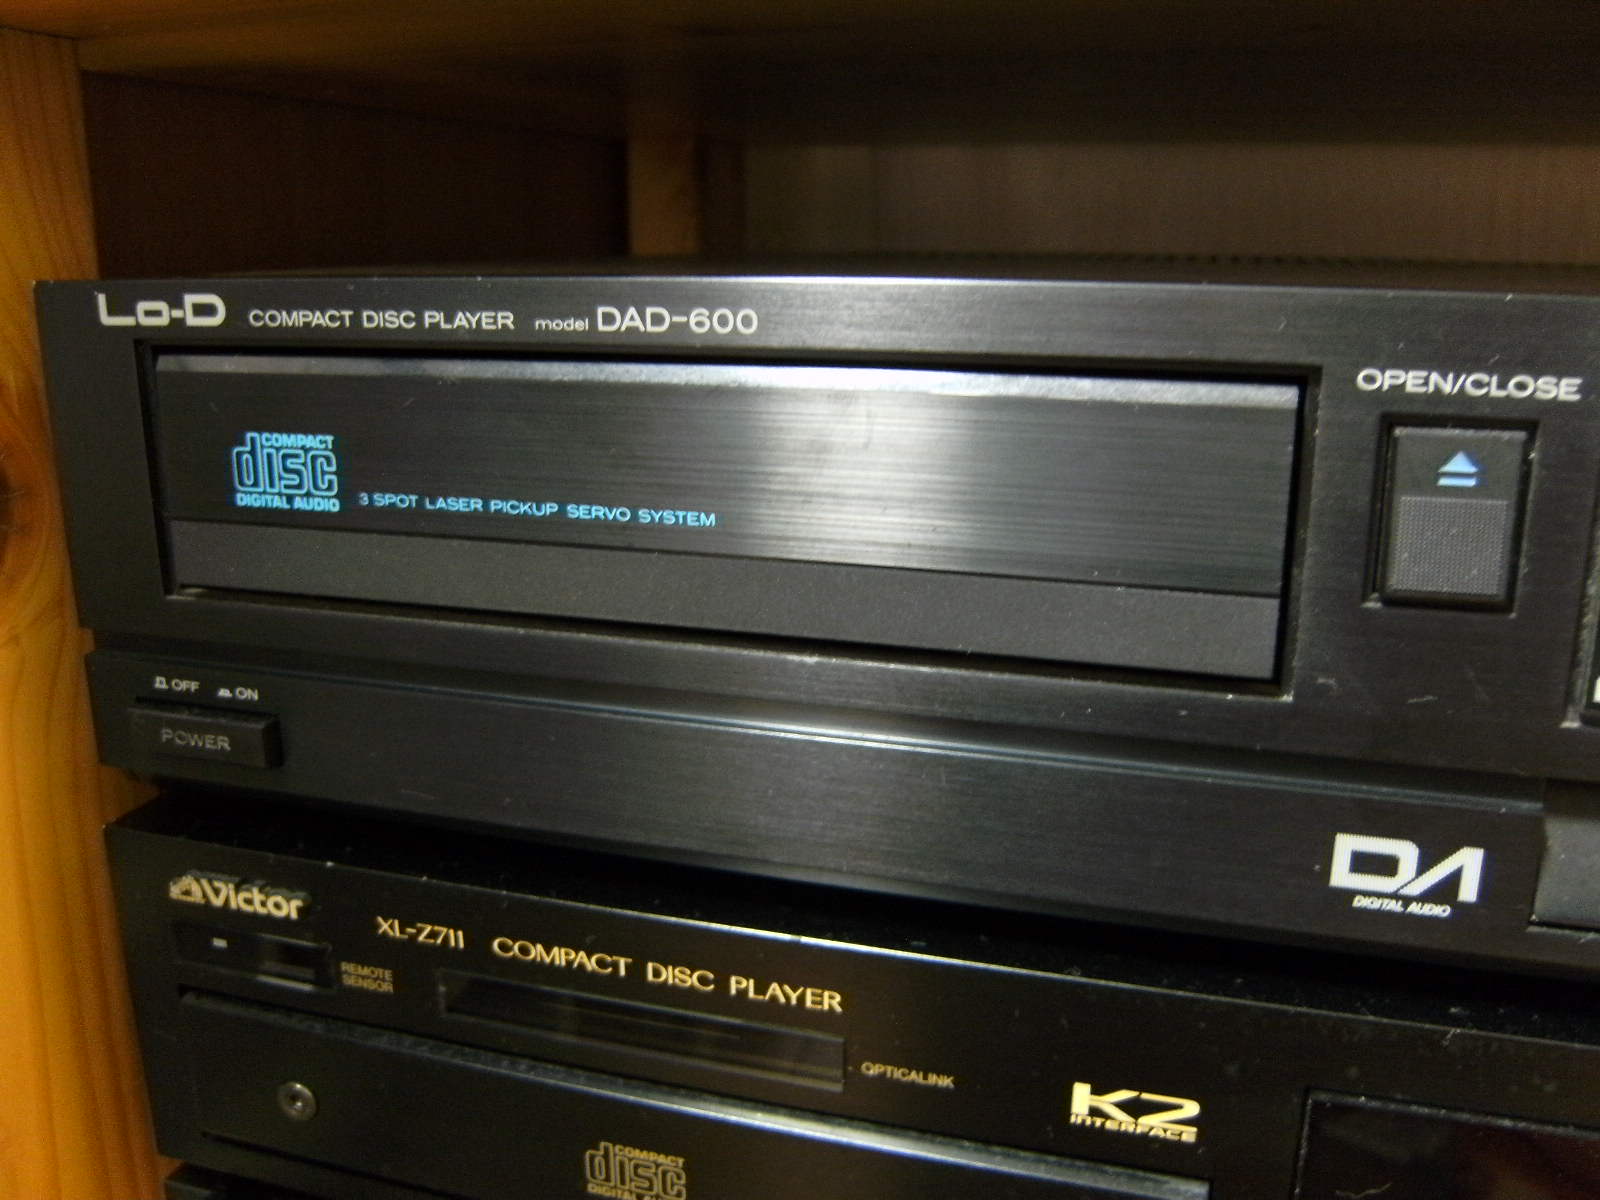 Compact Disc Player Lo-D DAD-600